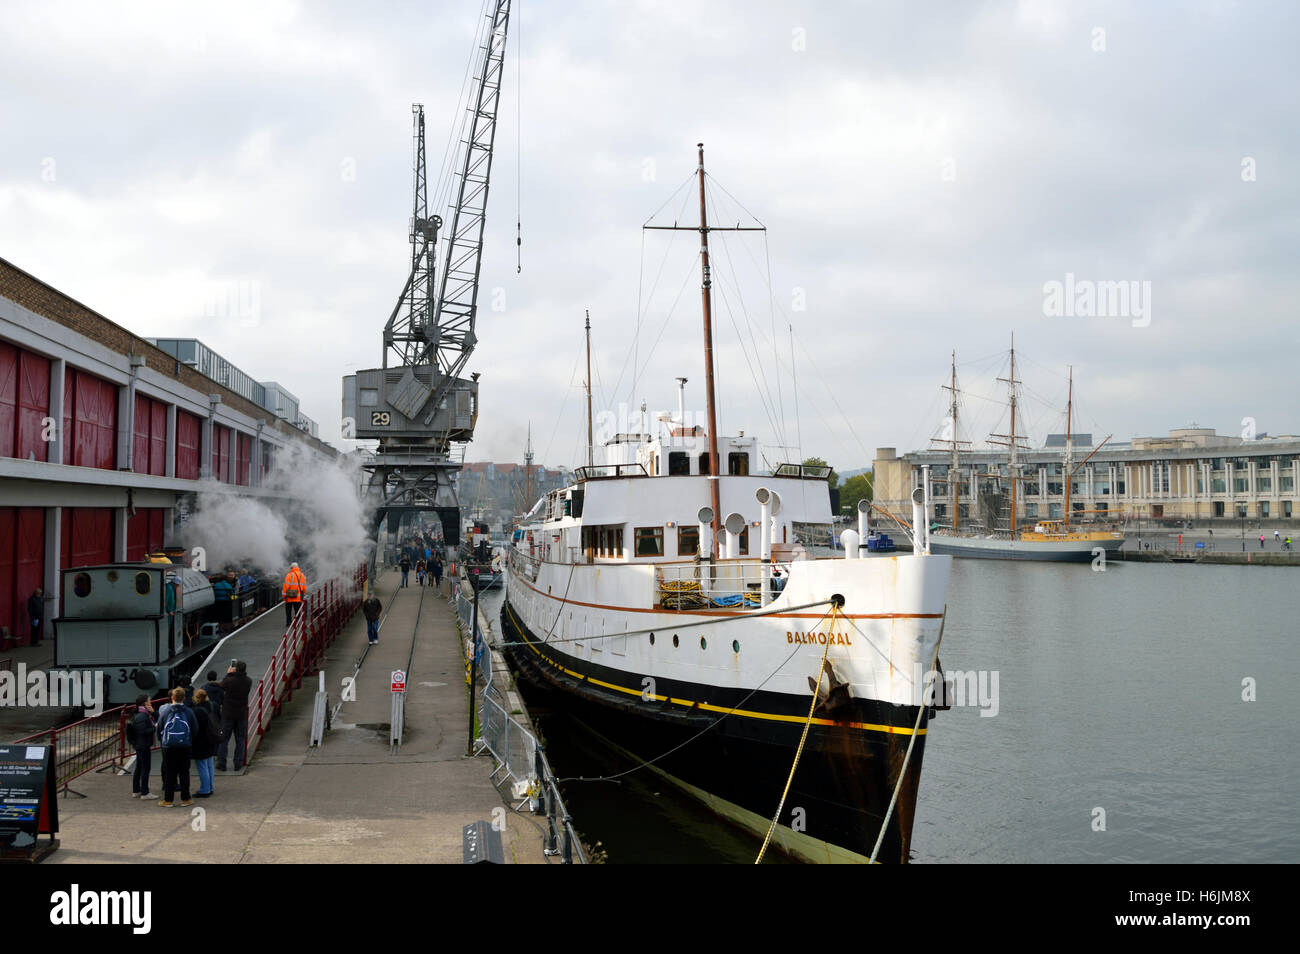 The MV Balmoral ship moored outside the M shed museum in Bristol's Floating Harbour Stock Photo